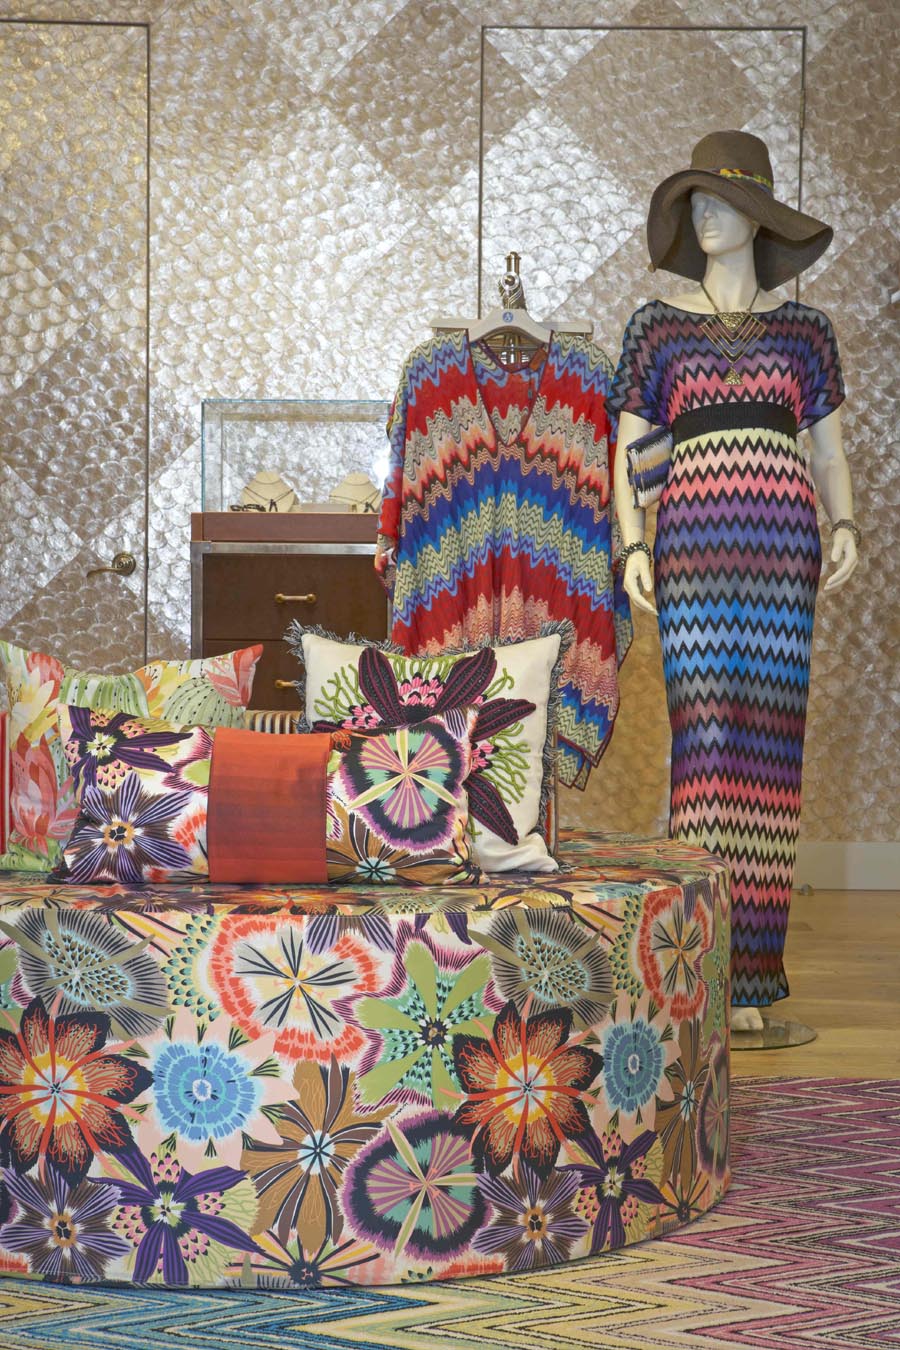 Seaside Luxe to Carry Missoni Home and Apparel